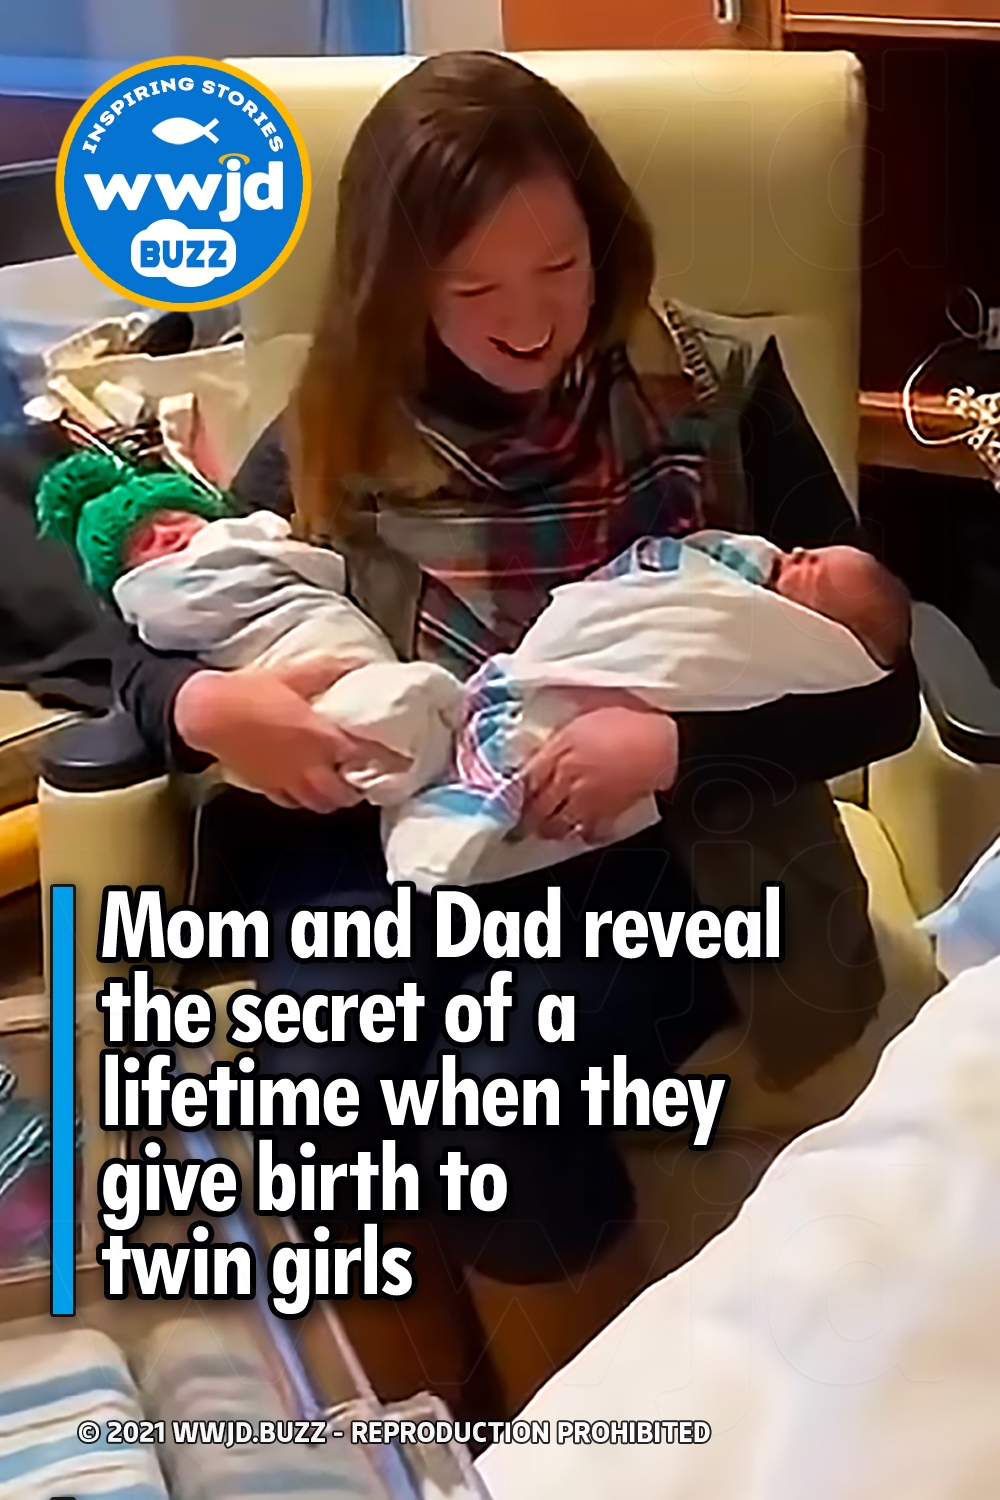 Mom and Dad reveal the secret of a lifetime when they give birth to twin girls